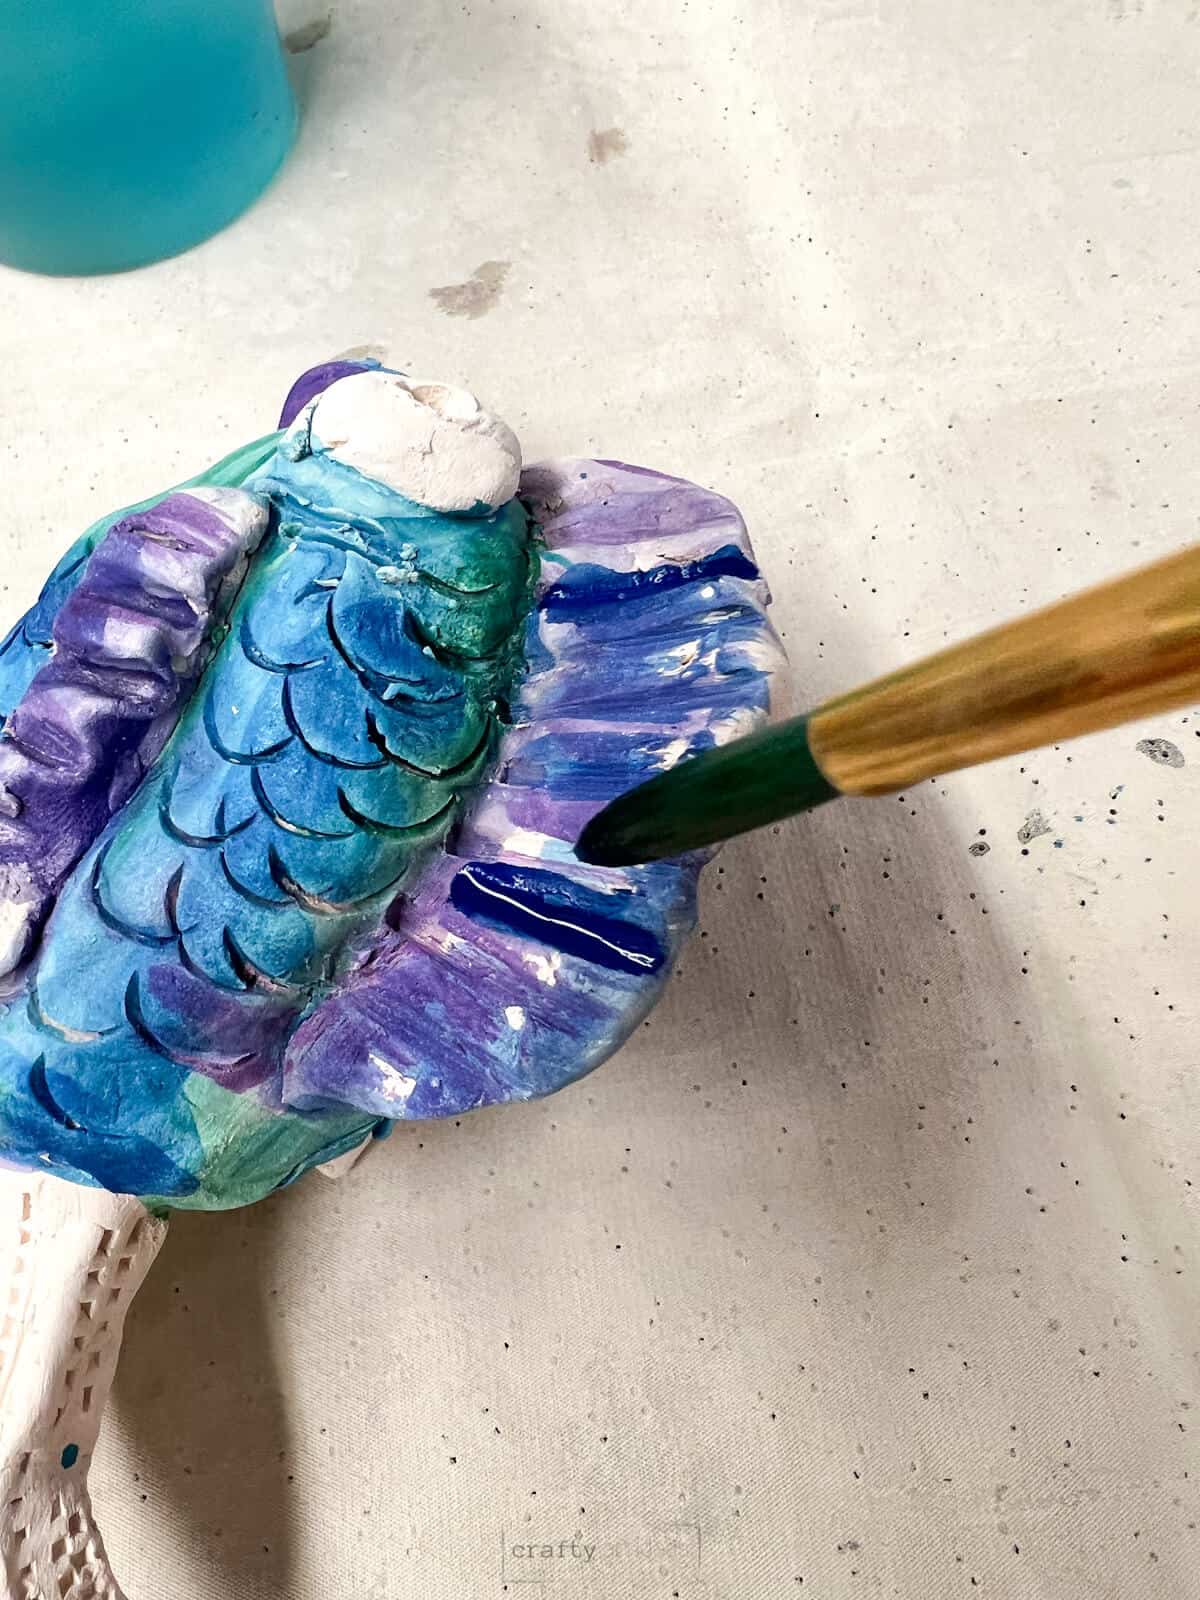 brush painting ceramic fish with watercolor paints.